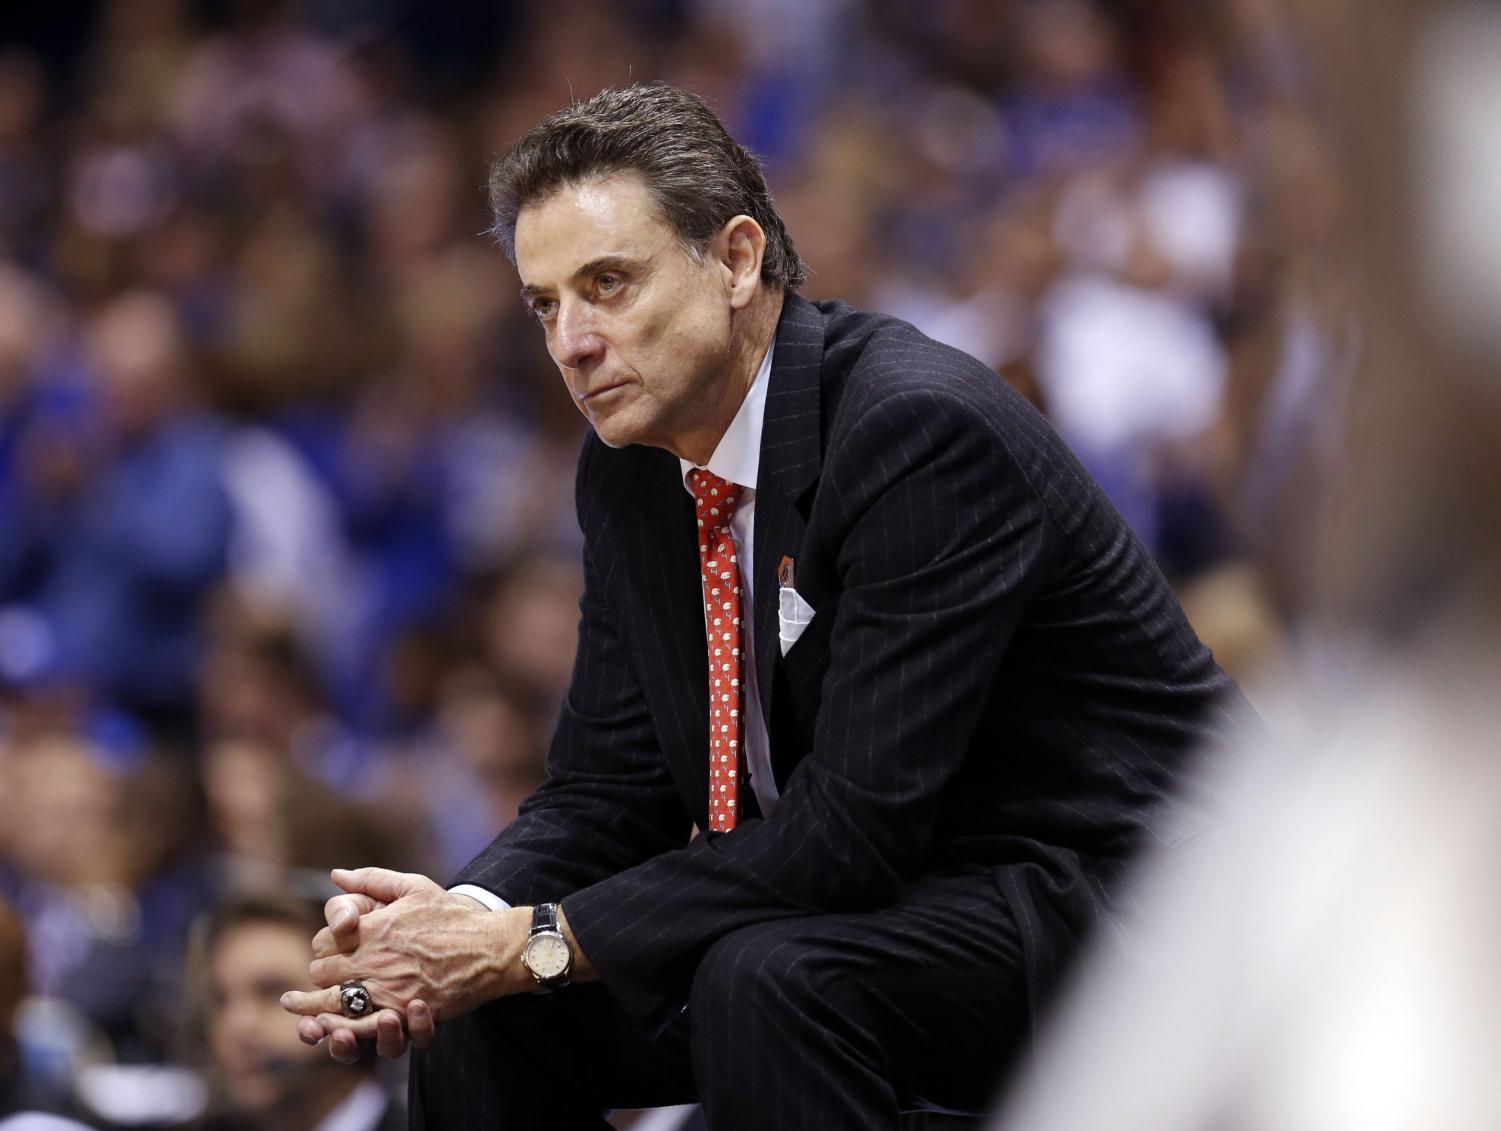 Michael Arace | Rick Pitino gets boot, but system still unchanged